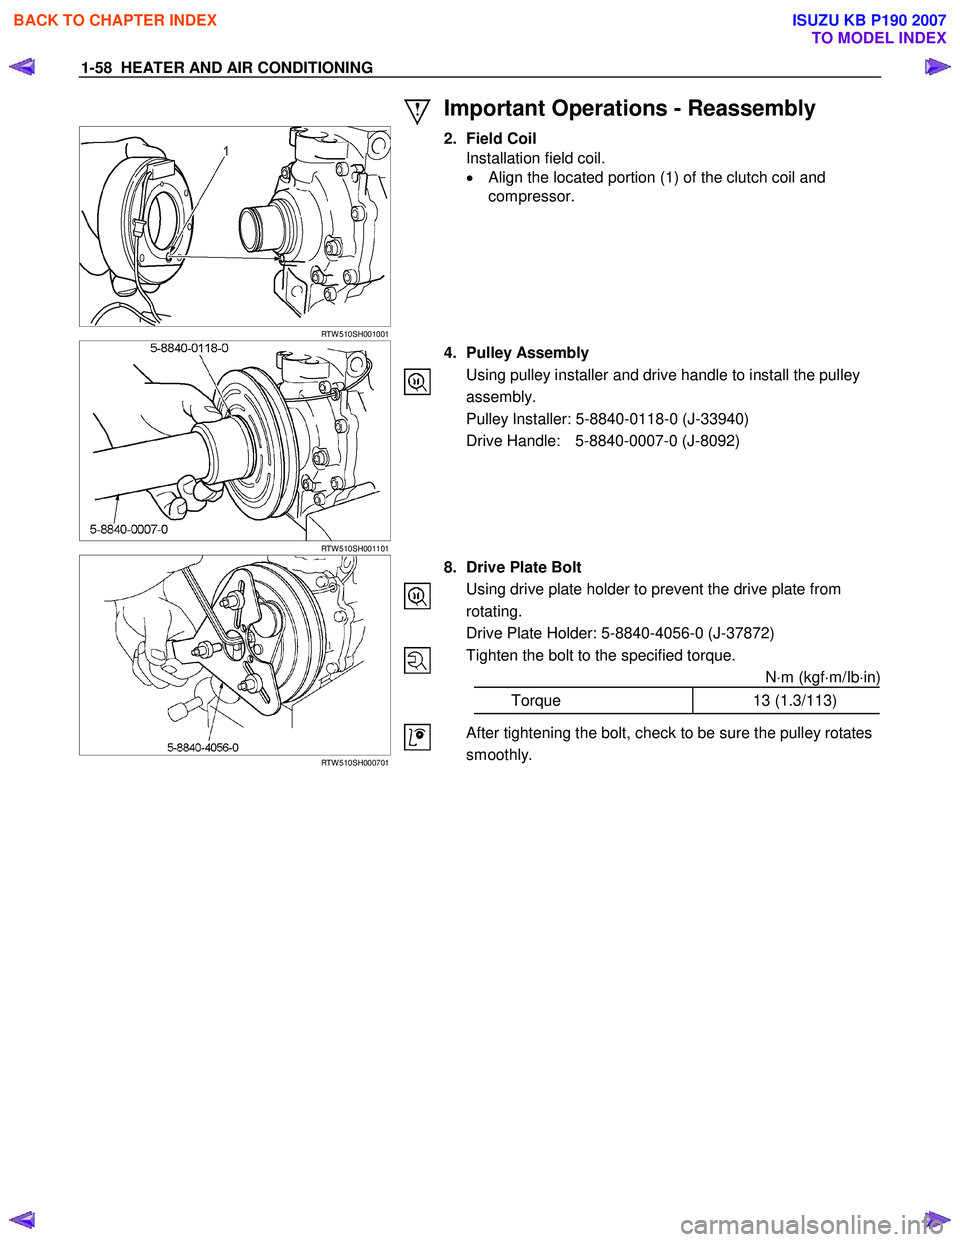 ISUZU KB P190 2007  Workshop Repair Manual 1-58  HEATER AND AIR CONDITIONING 
 Important Operations - Reassembly   
 
RTW 510SH001001 
  
 
 
 
 
  2. Field Coil  
  Installation field coil.  •  Align the located portion (1) of the clutch co